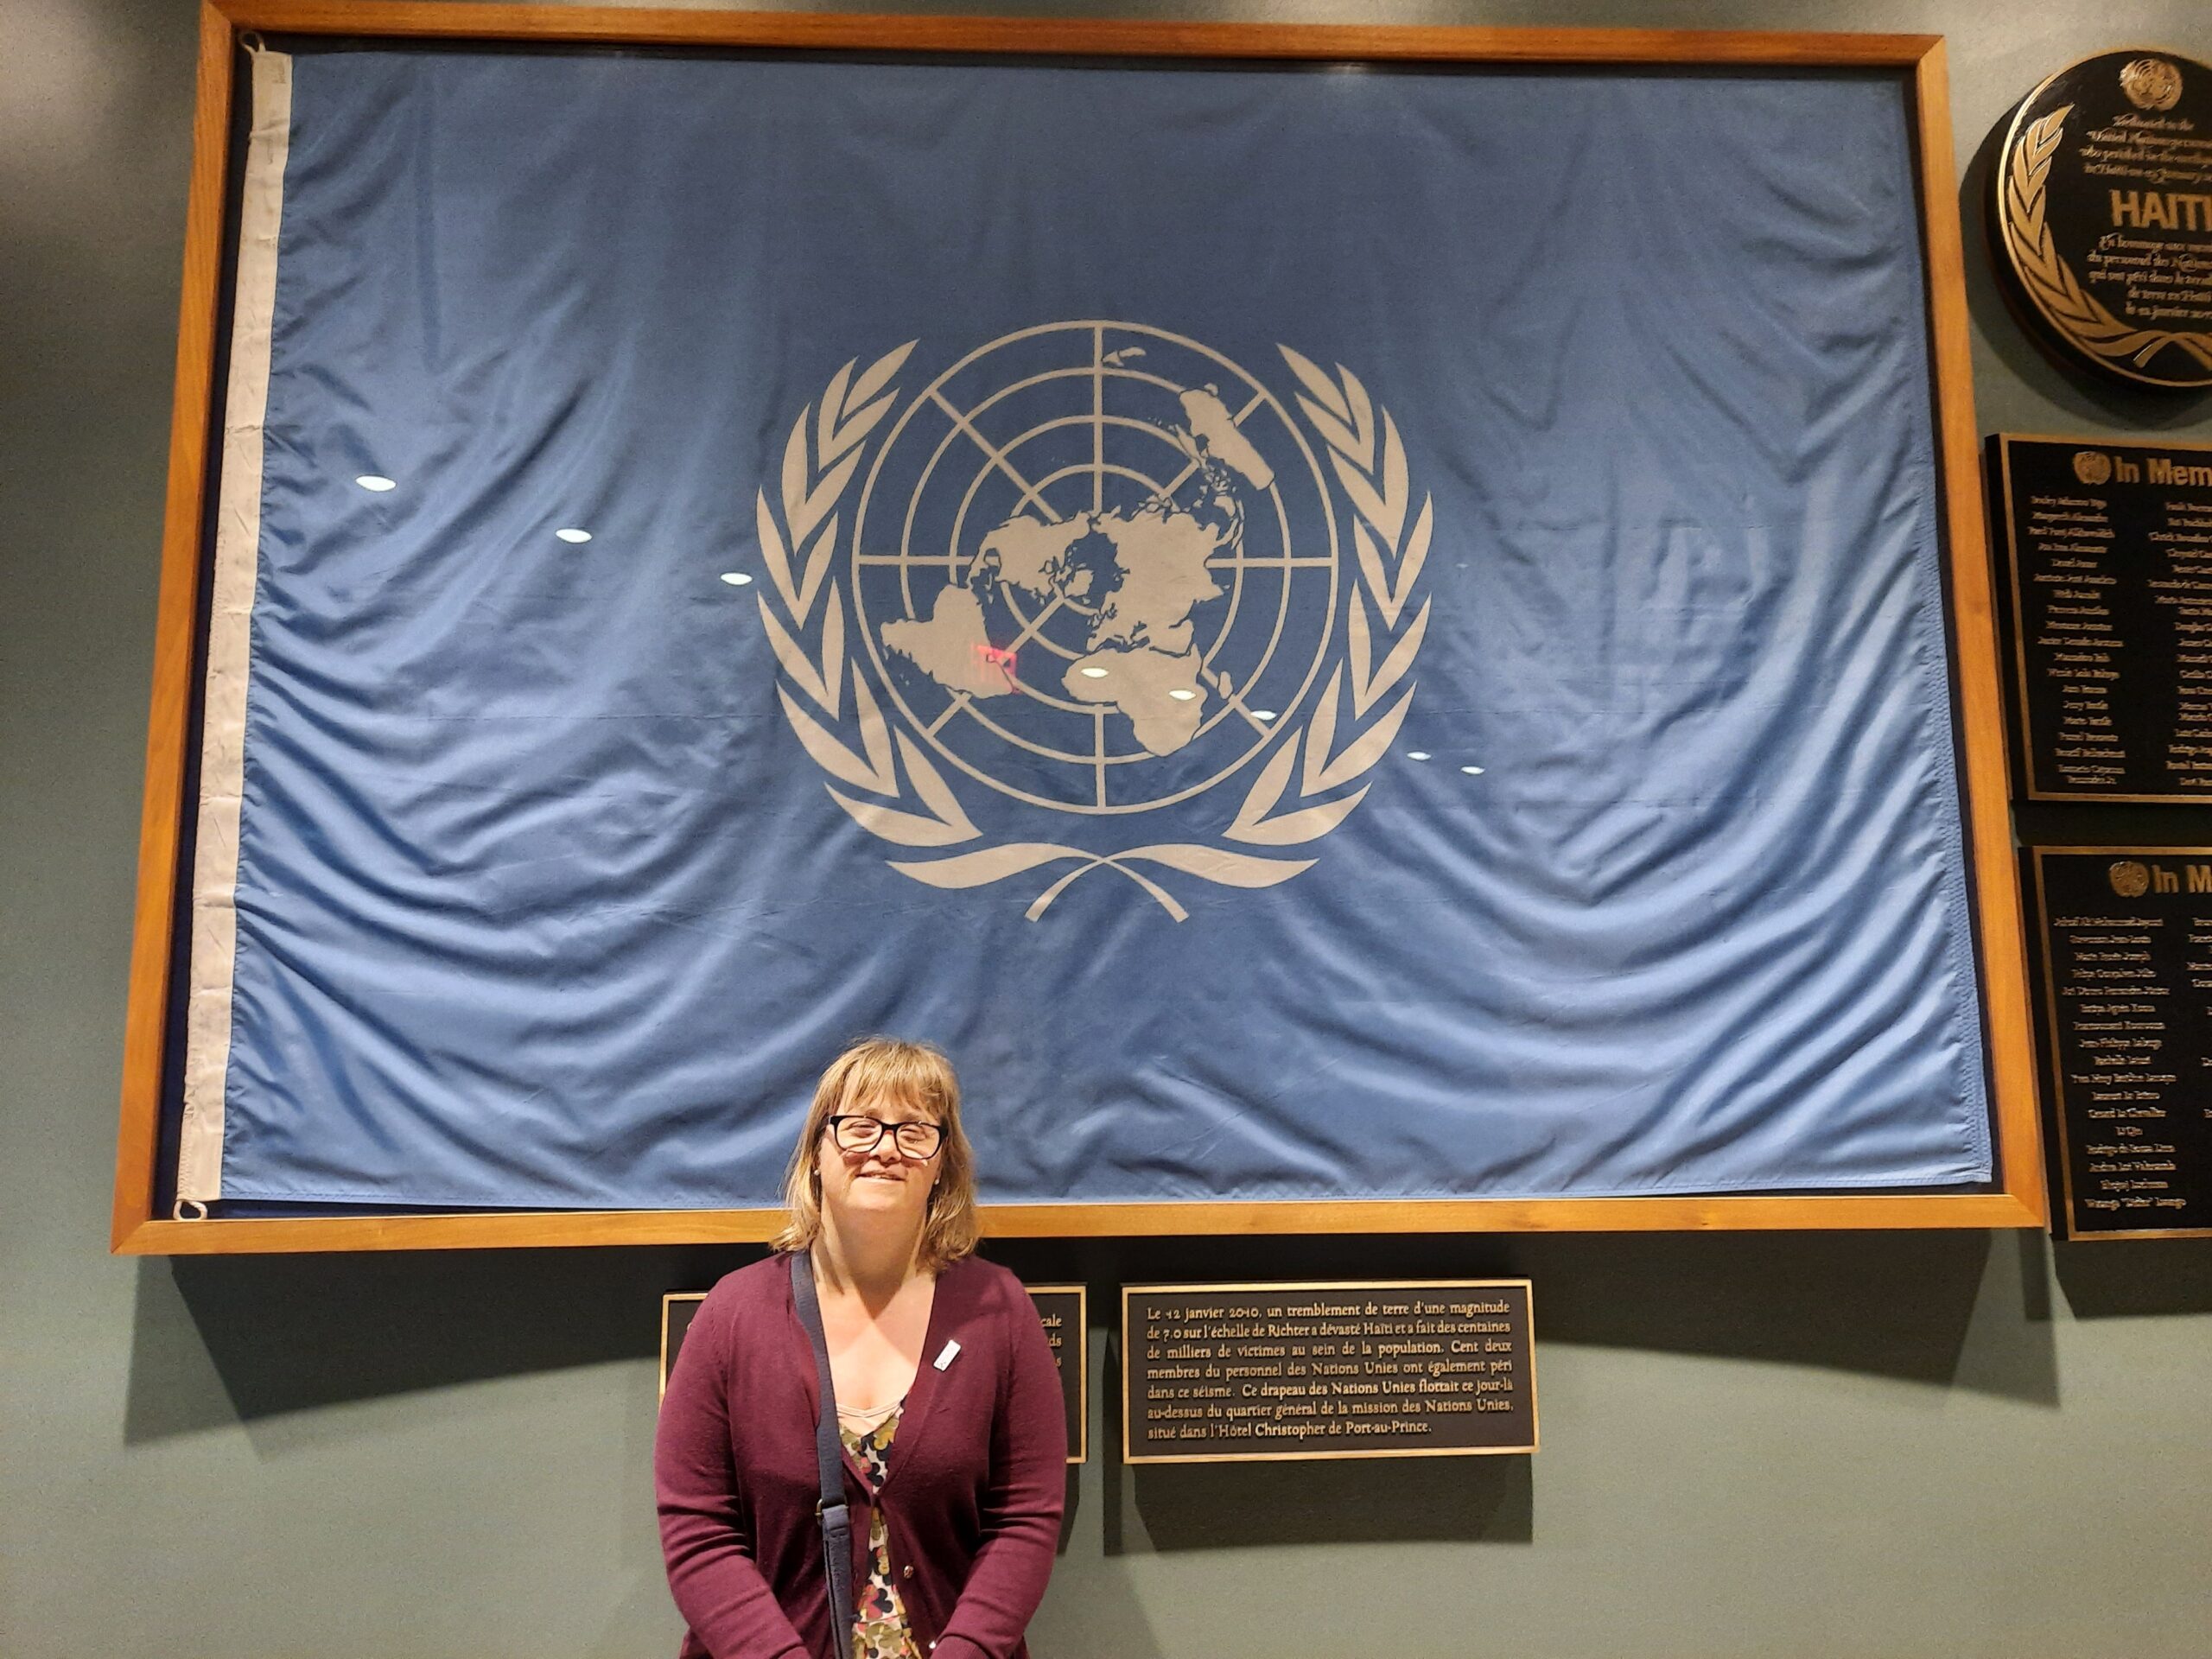 Emma, a woman who has Down's syndrome, stands in front of a huge framed flag of the United Nations.